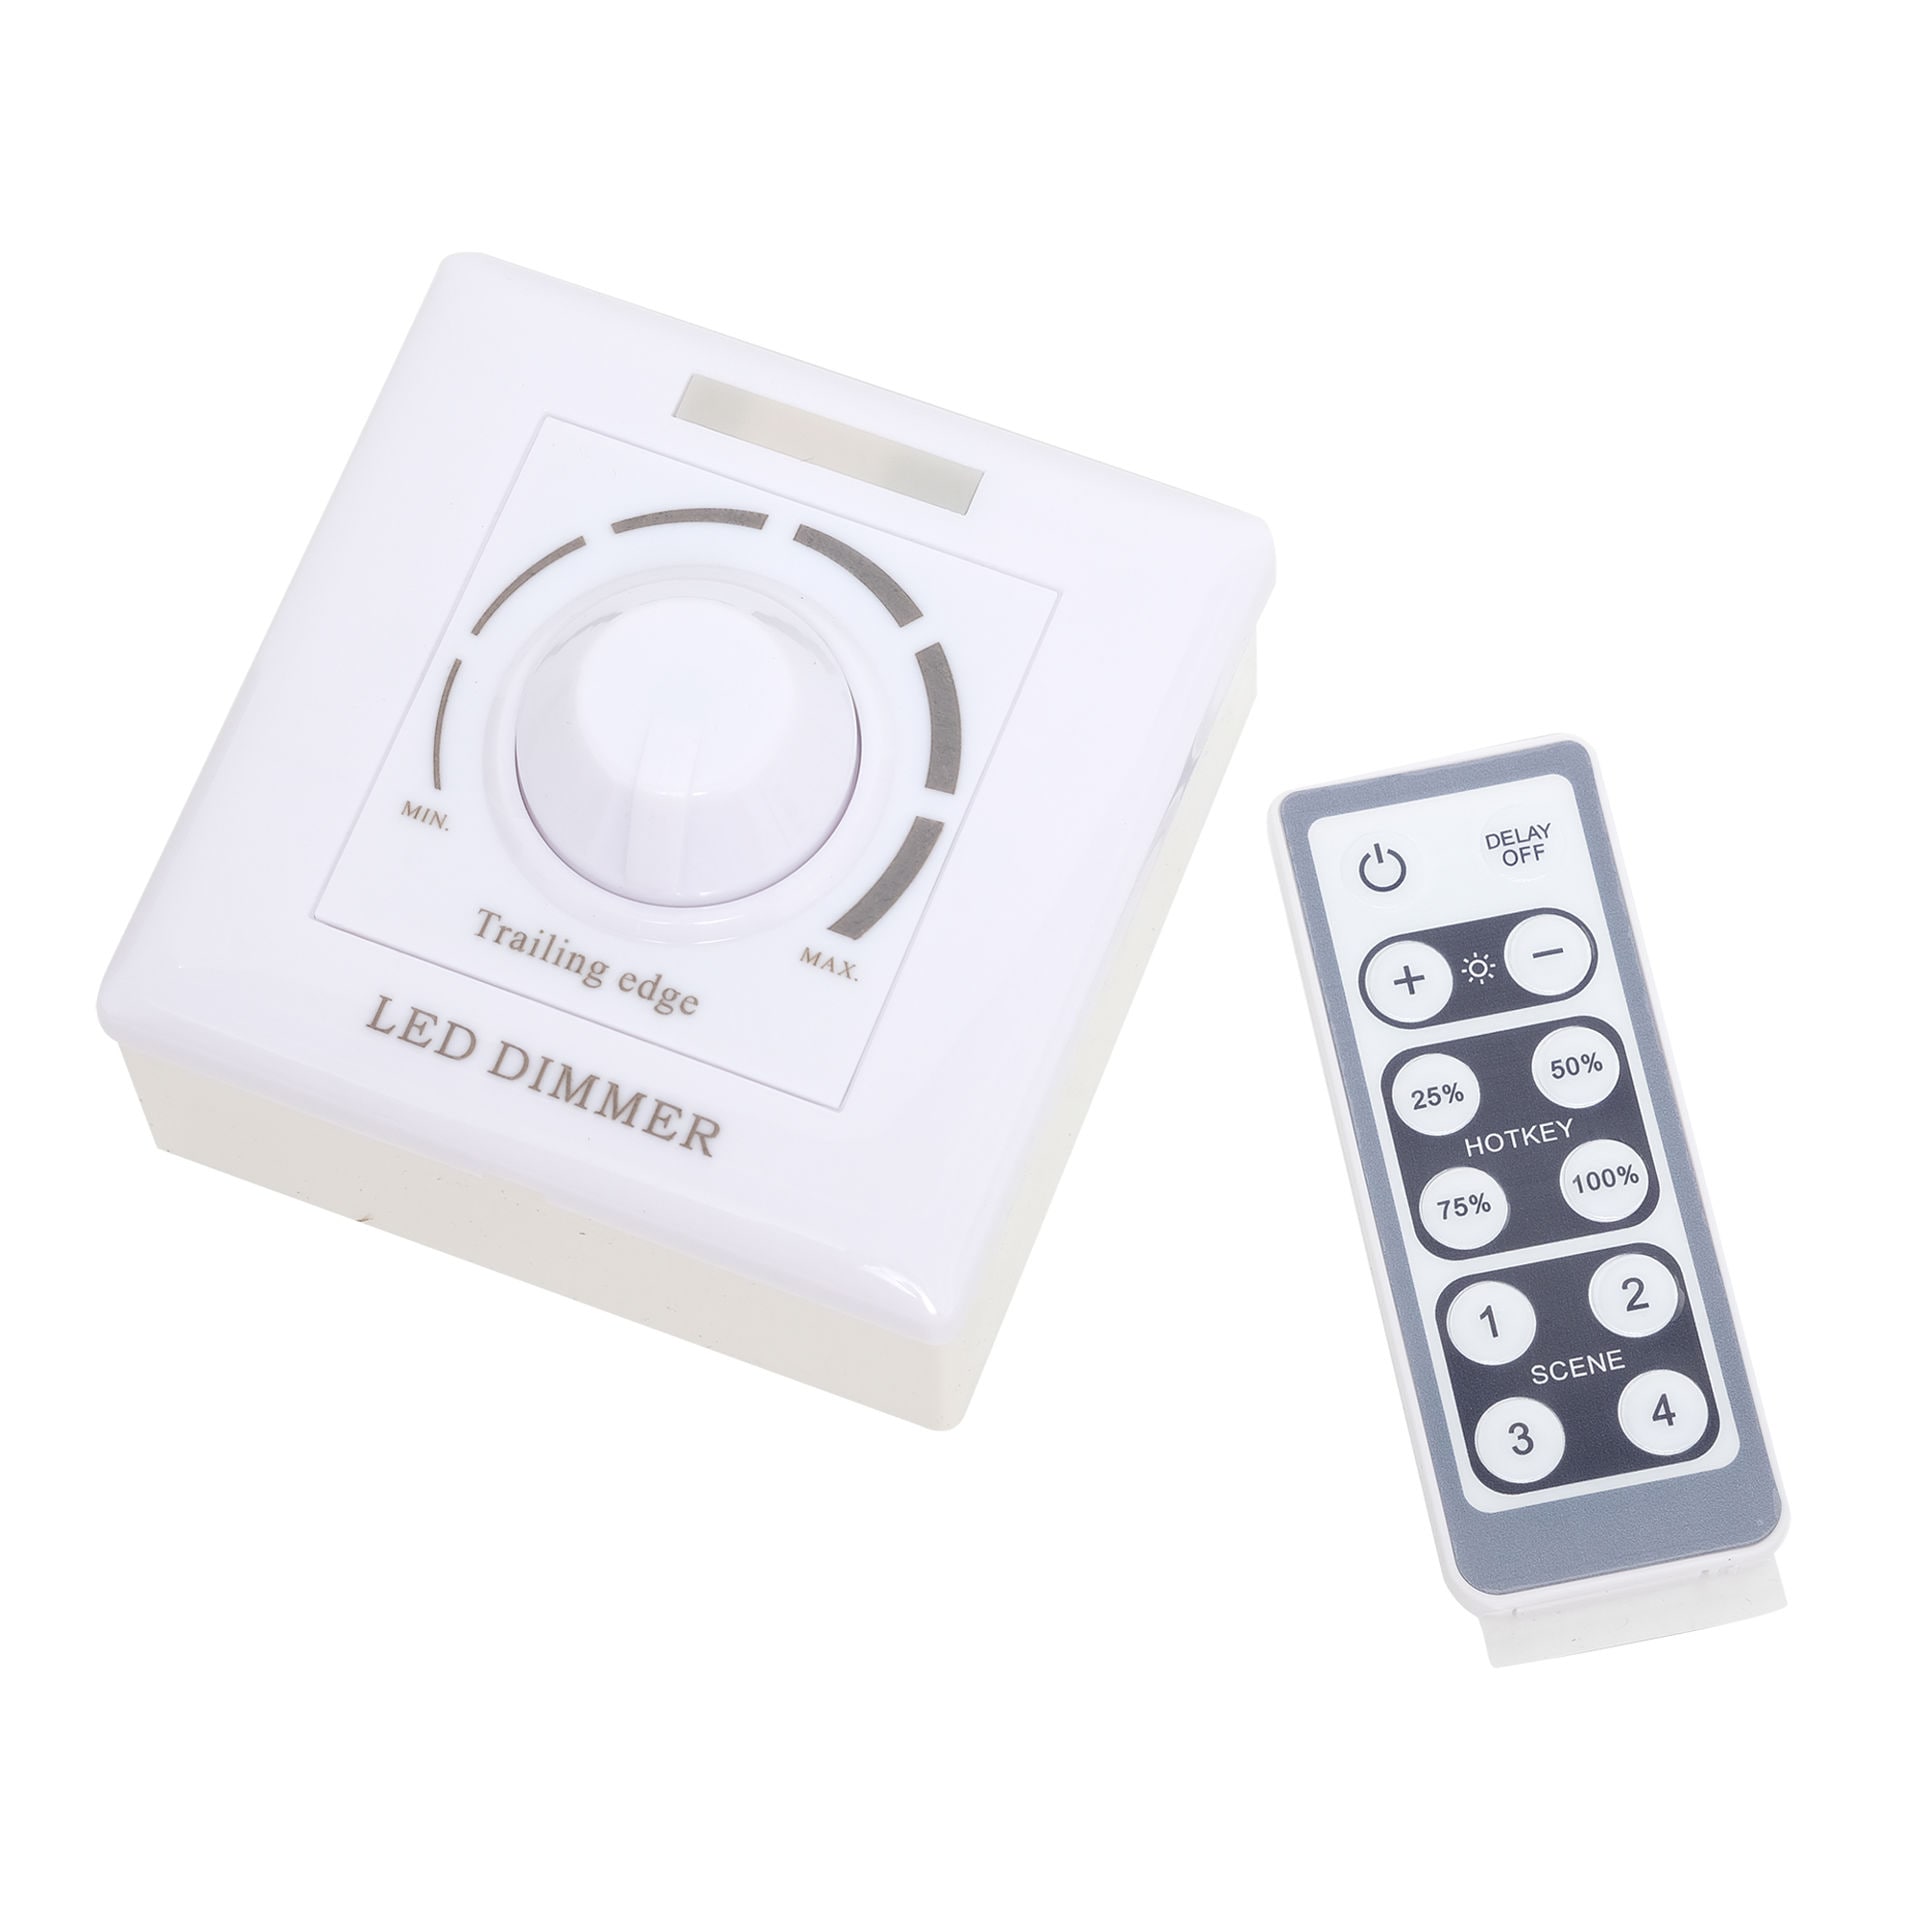 https://assets.dragonmart.ae/pictures/0765963_led-dimmer-with-remote-white.jpeg